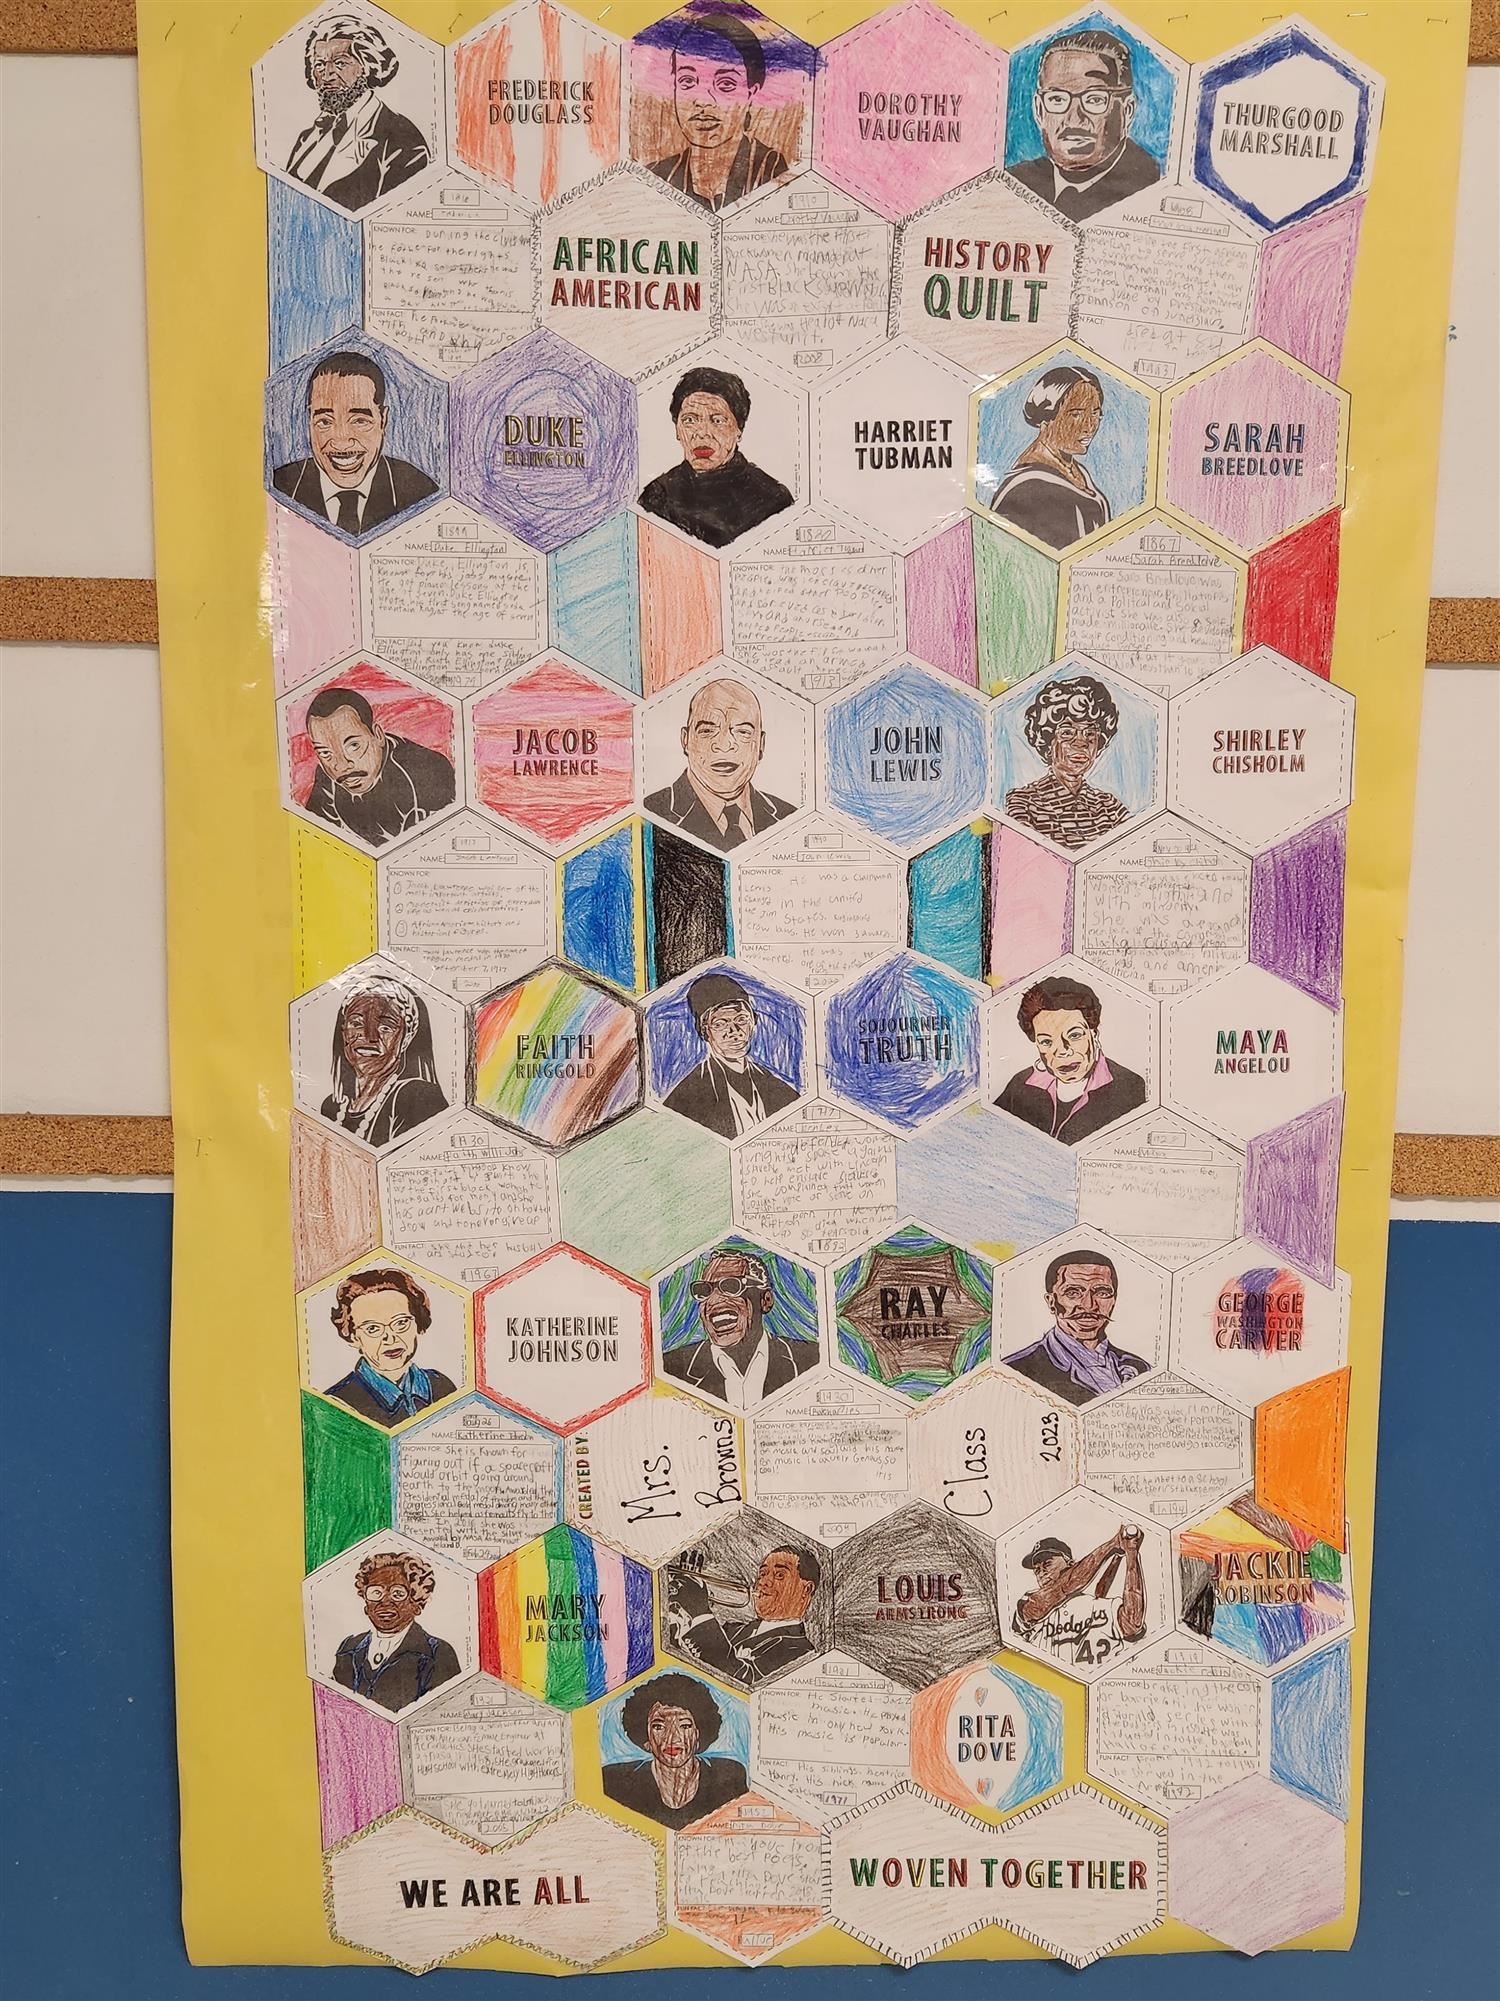 A paper "quilt" made out of interlocking hexagons featuring photos and information about famous Black Americans.